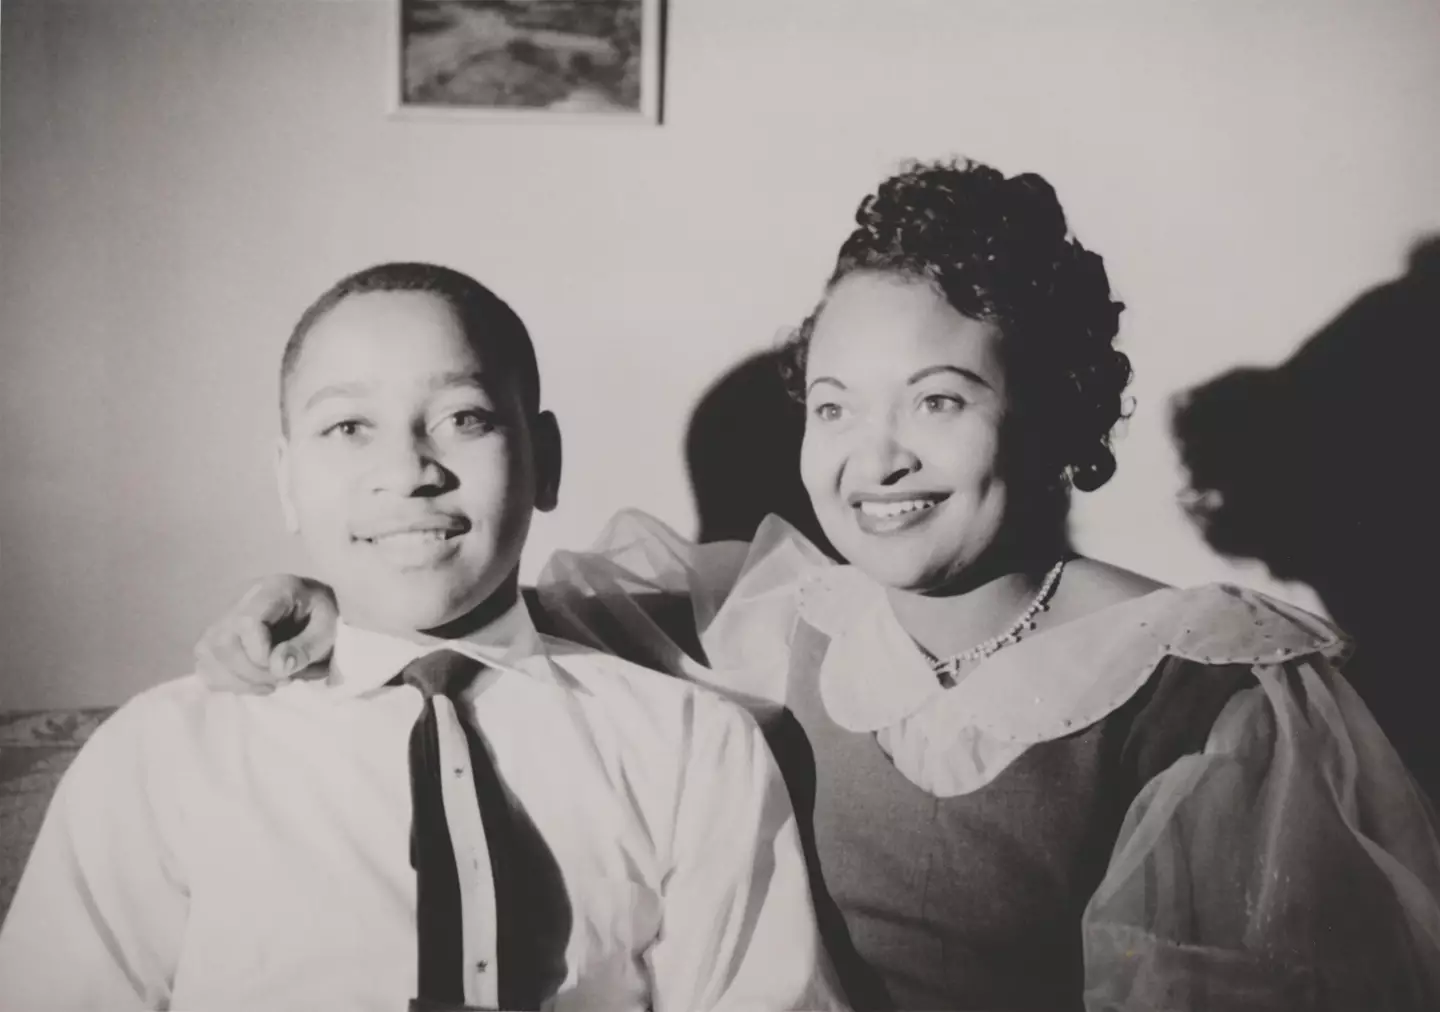 Emmett Till was abducted and lynched in 1955.